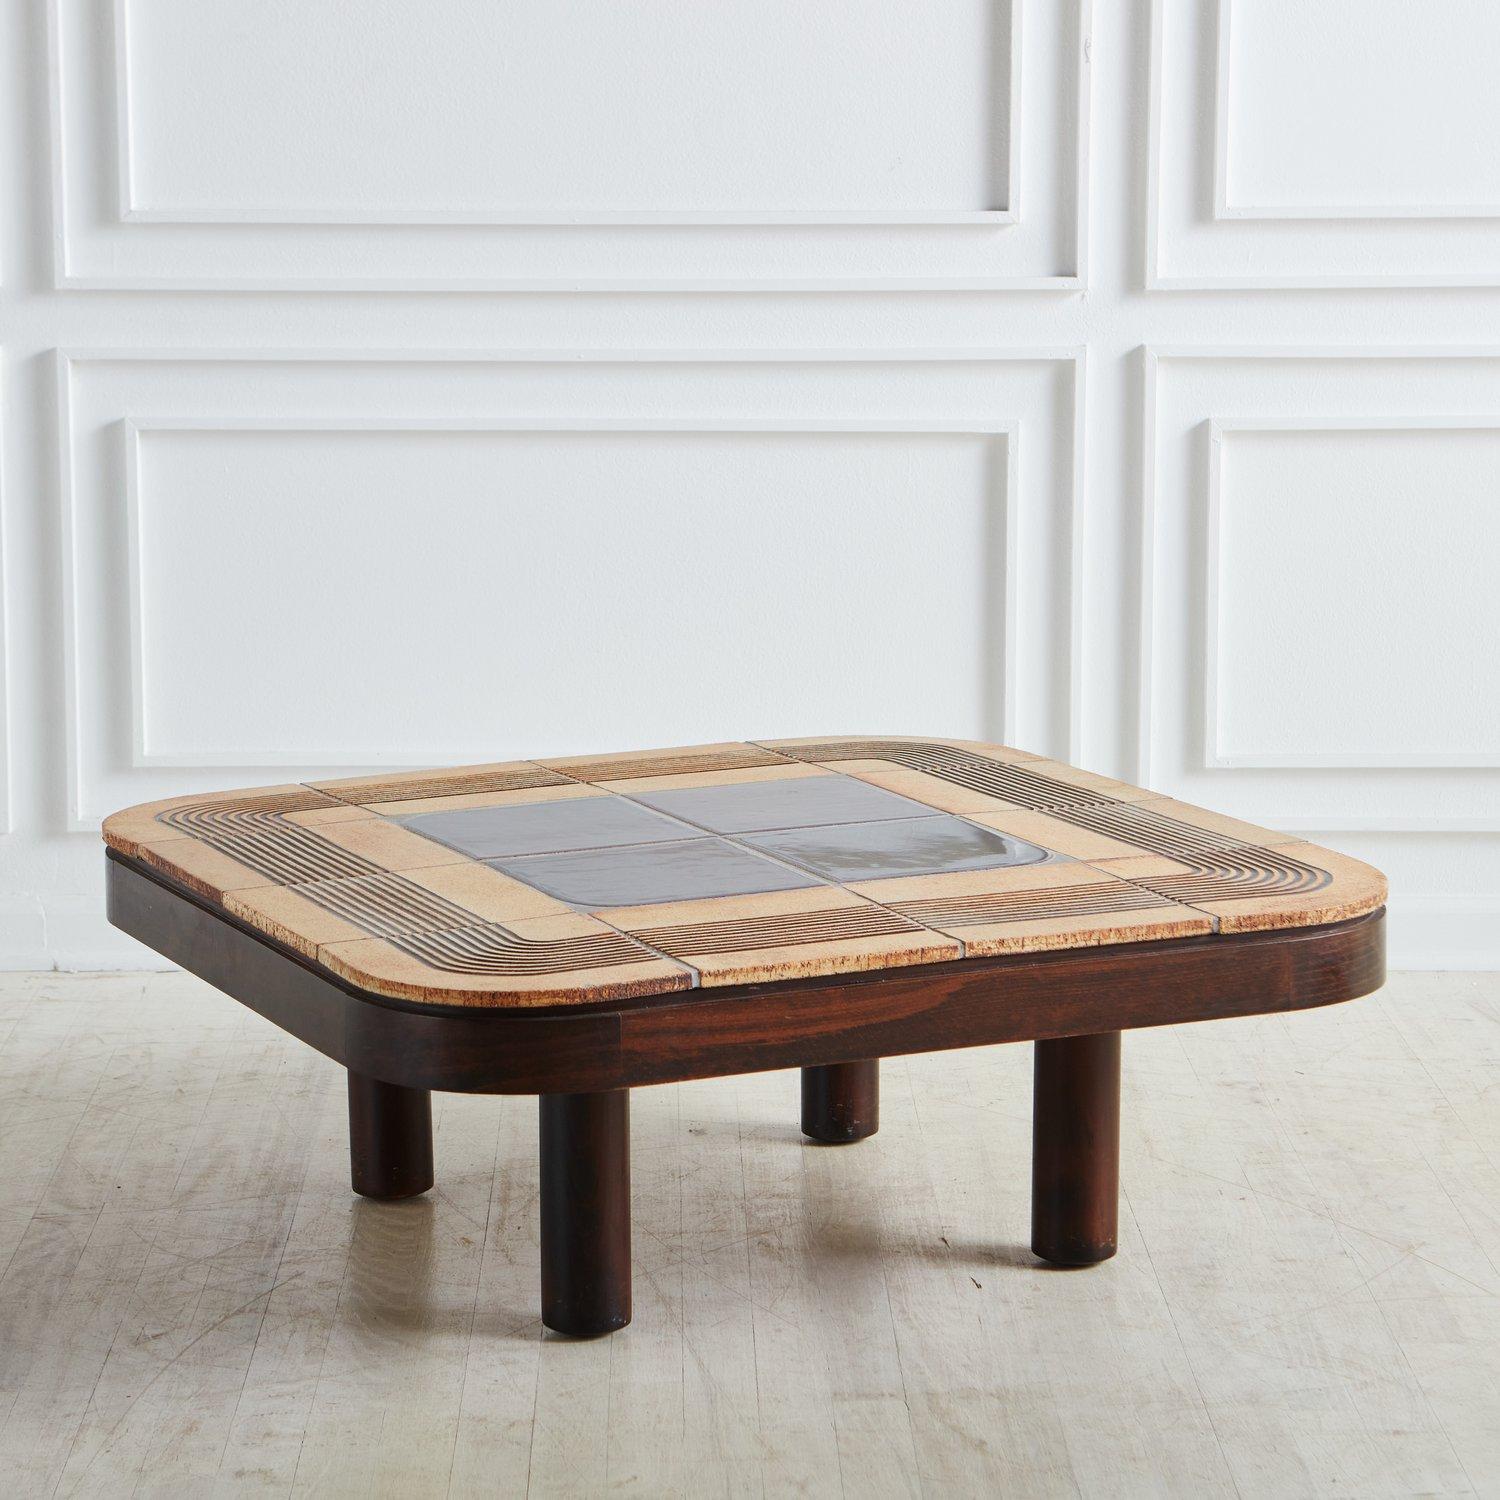 A beautiful French stained oak coffee table by Roger Capron. This table has rounded corners and features ceramic tiles from Vallauris, France in a geometric design with an incised line pattern. It stands on four thick cylindrical legs and has a